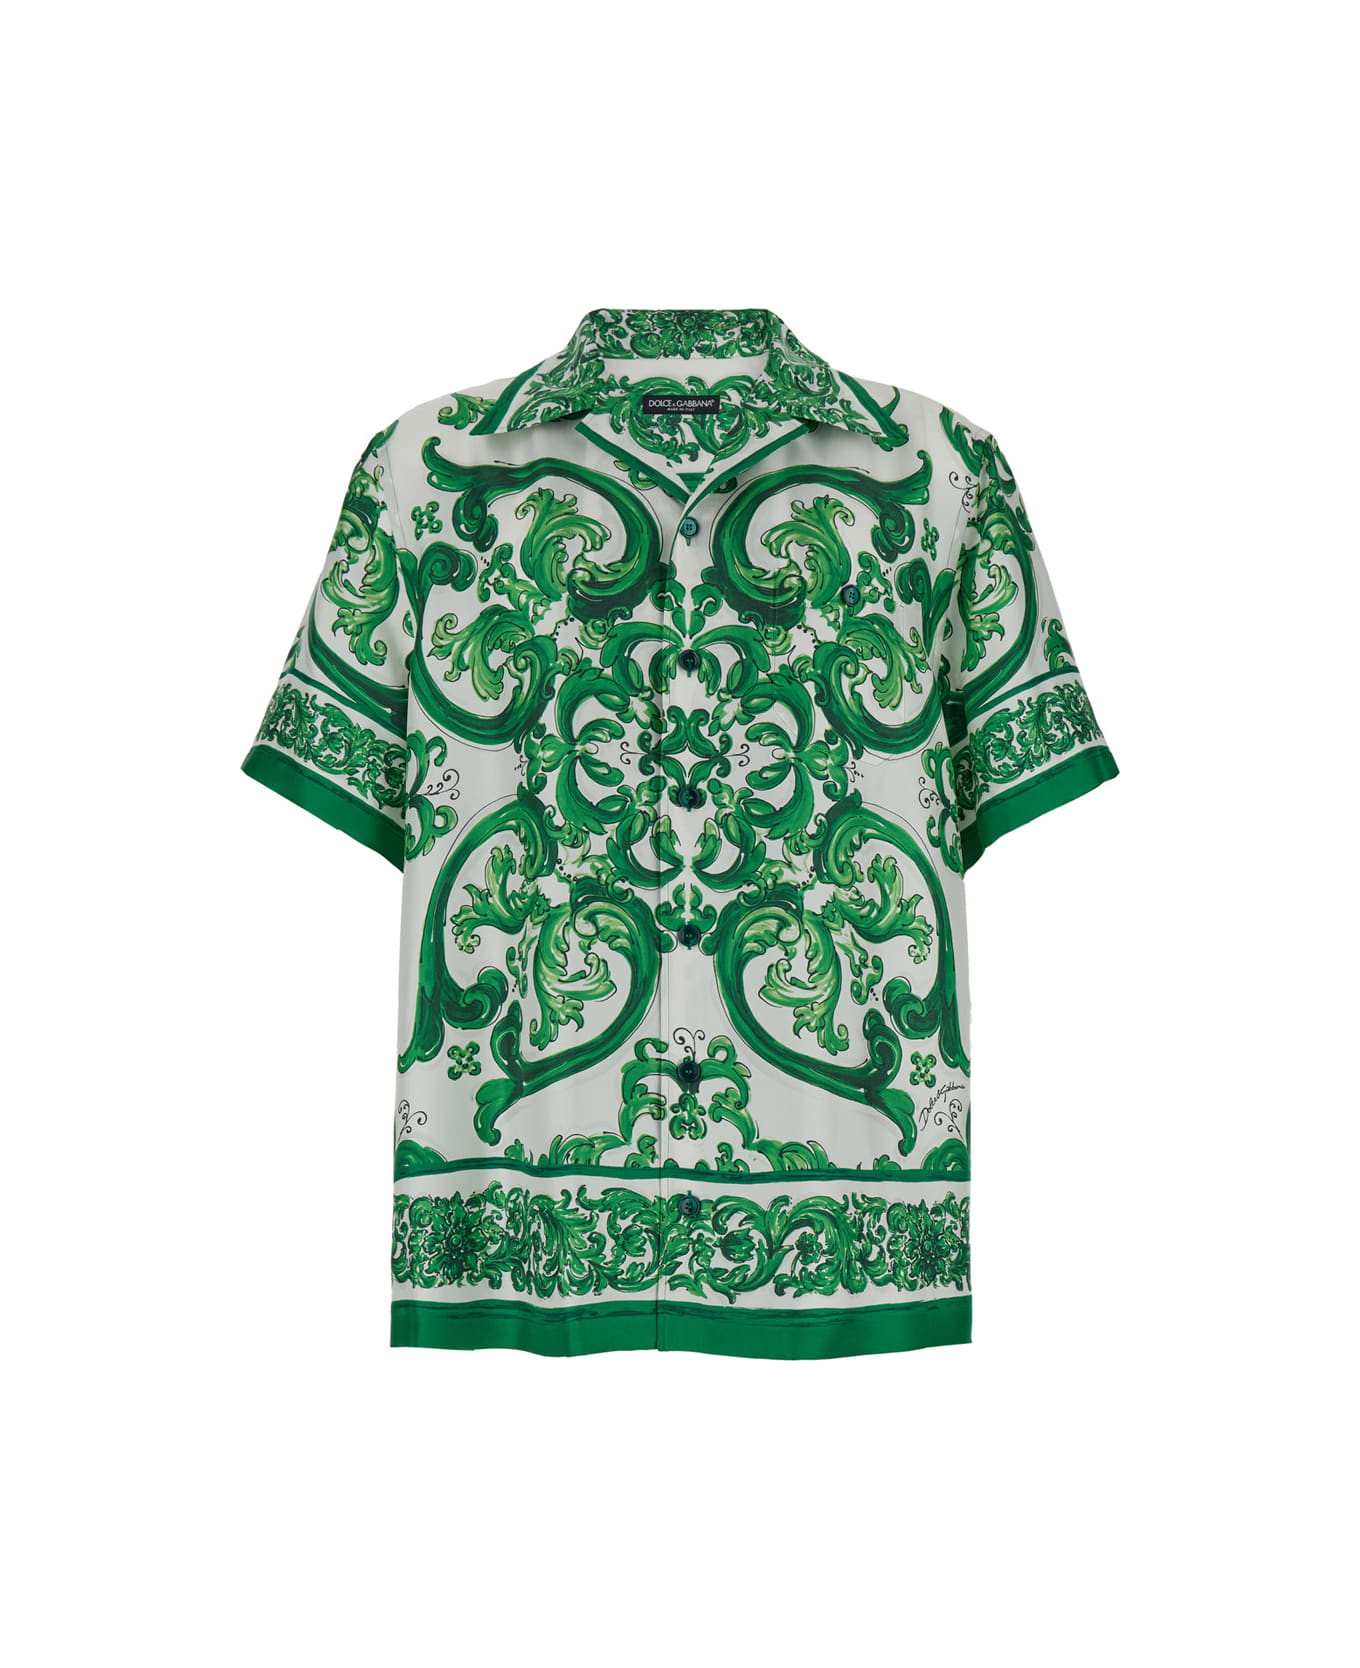 Dolce & Gabbana 'palermo' Green And White Bowling Shirt With Majolica Print In Silk Man - Green シャツ